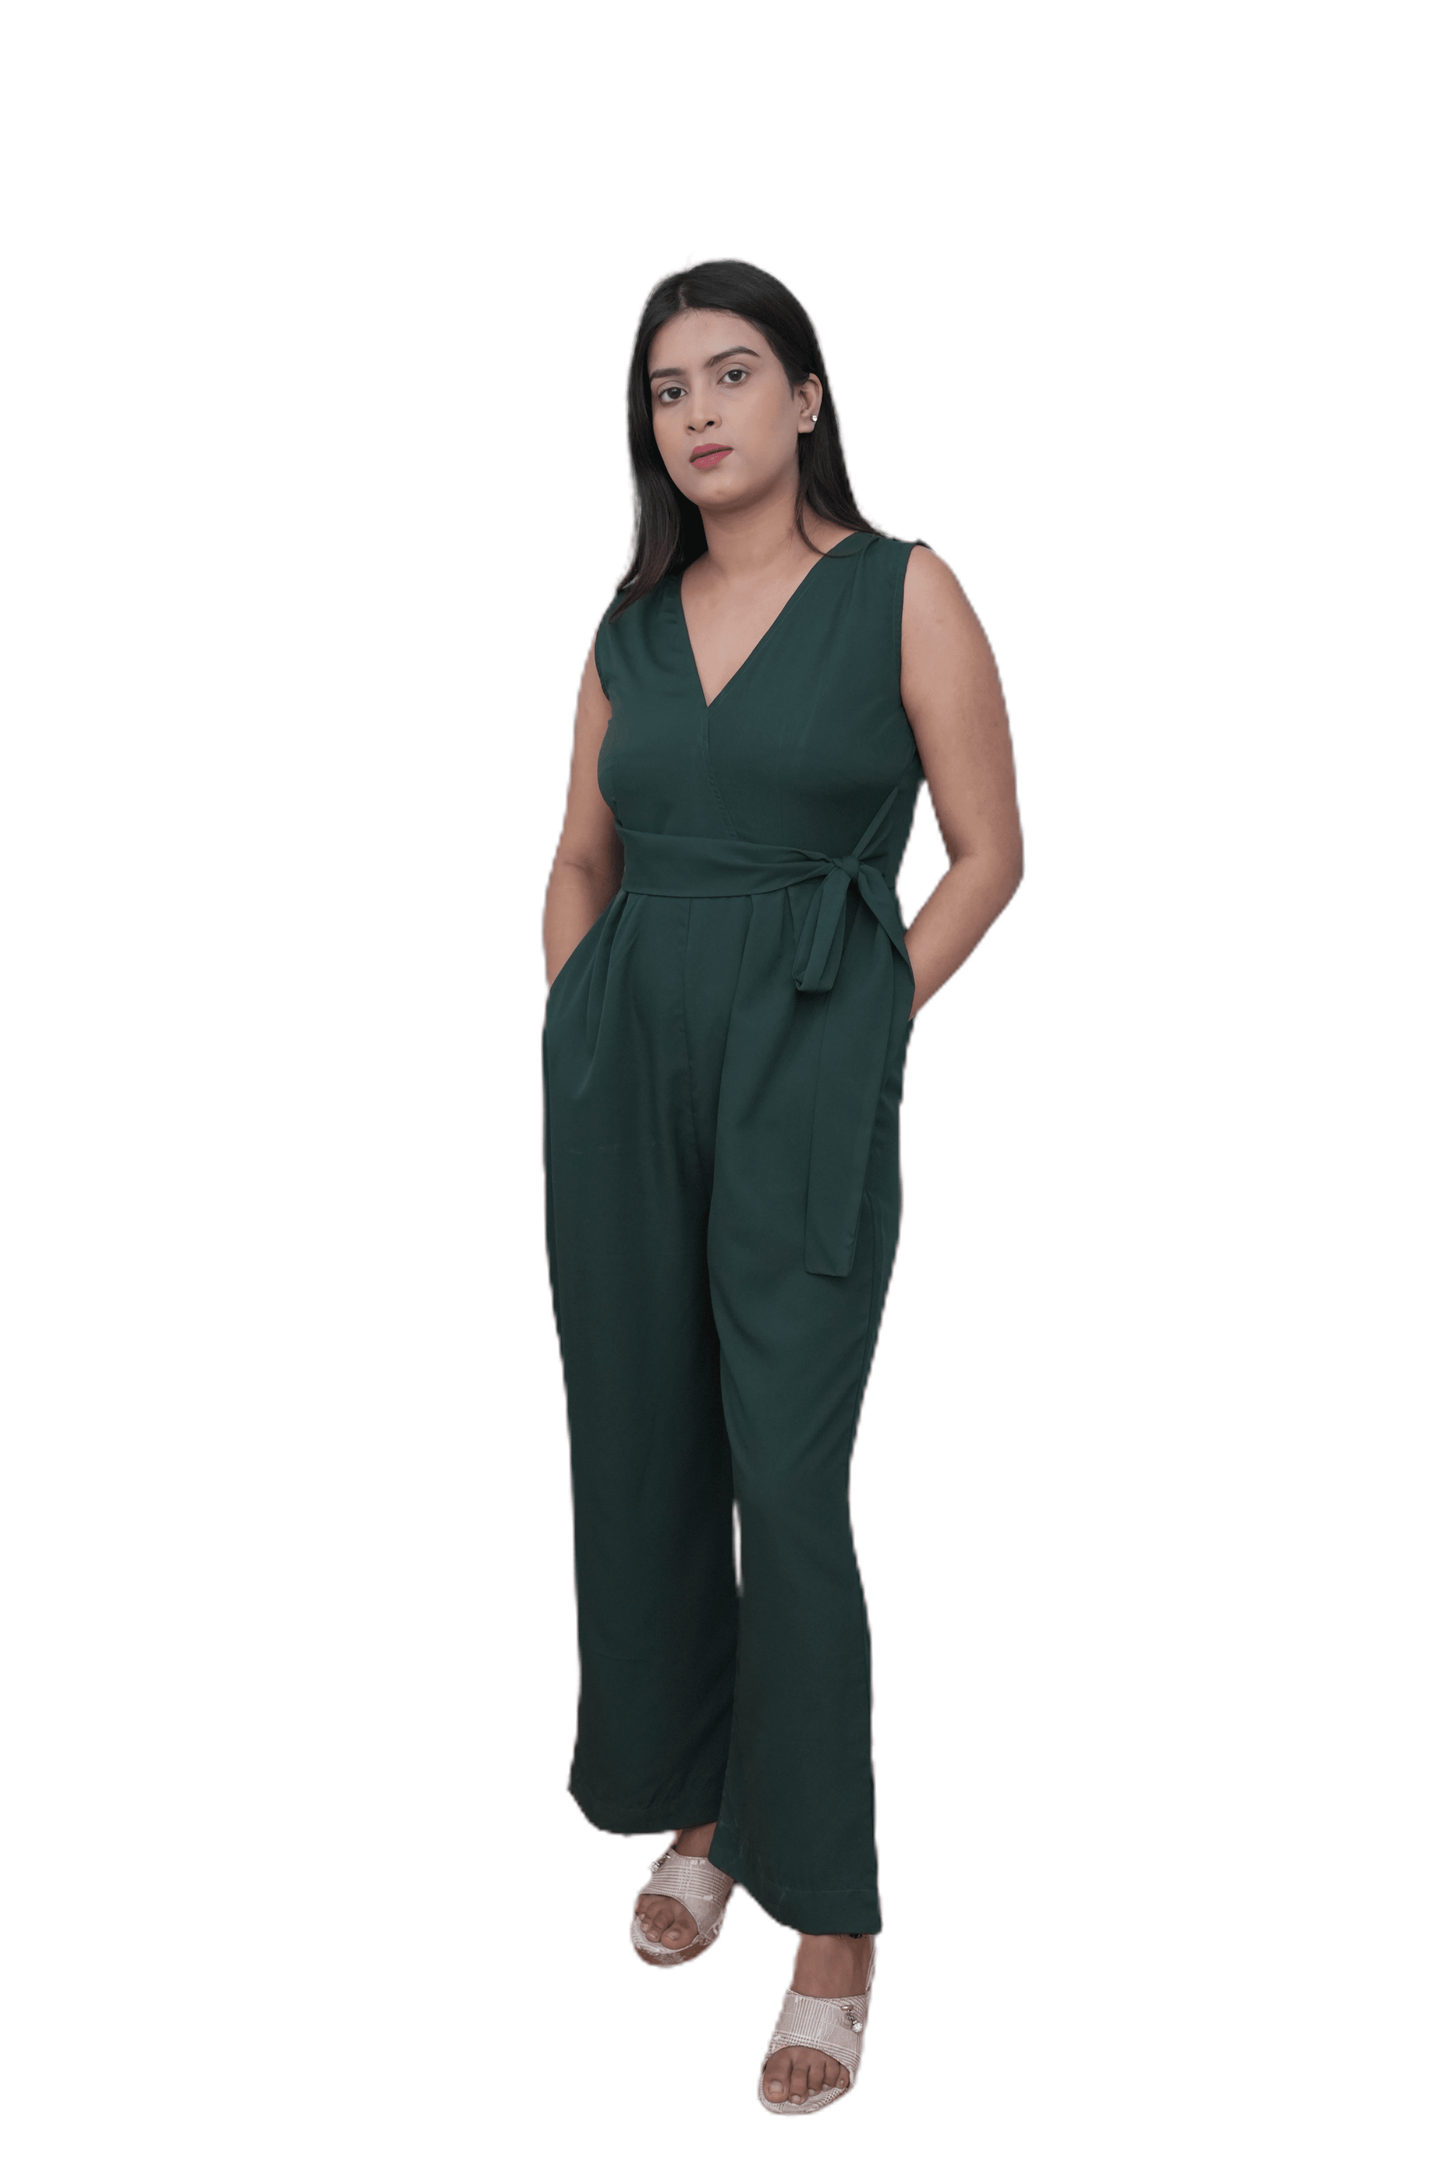 Azqaa Waistband Design Sleeveless Jumpsuit Women | Elegant And Modern One Piece Trendy Outfit | Comfortable Fabric & Tailored Fit